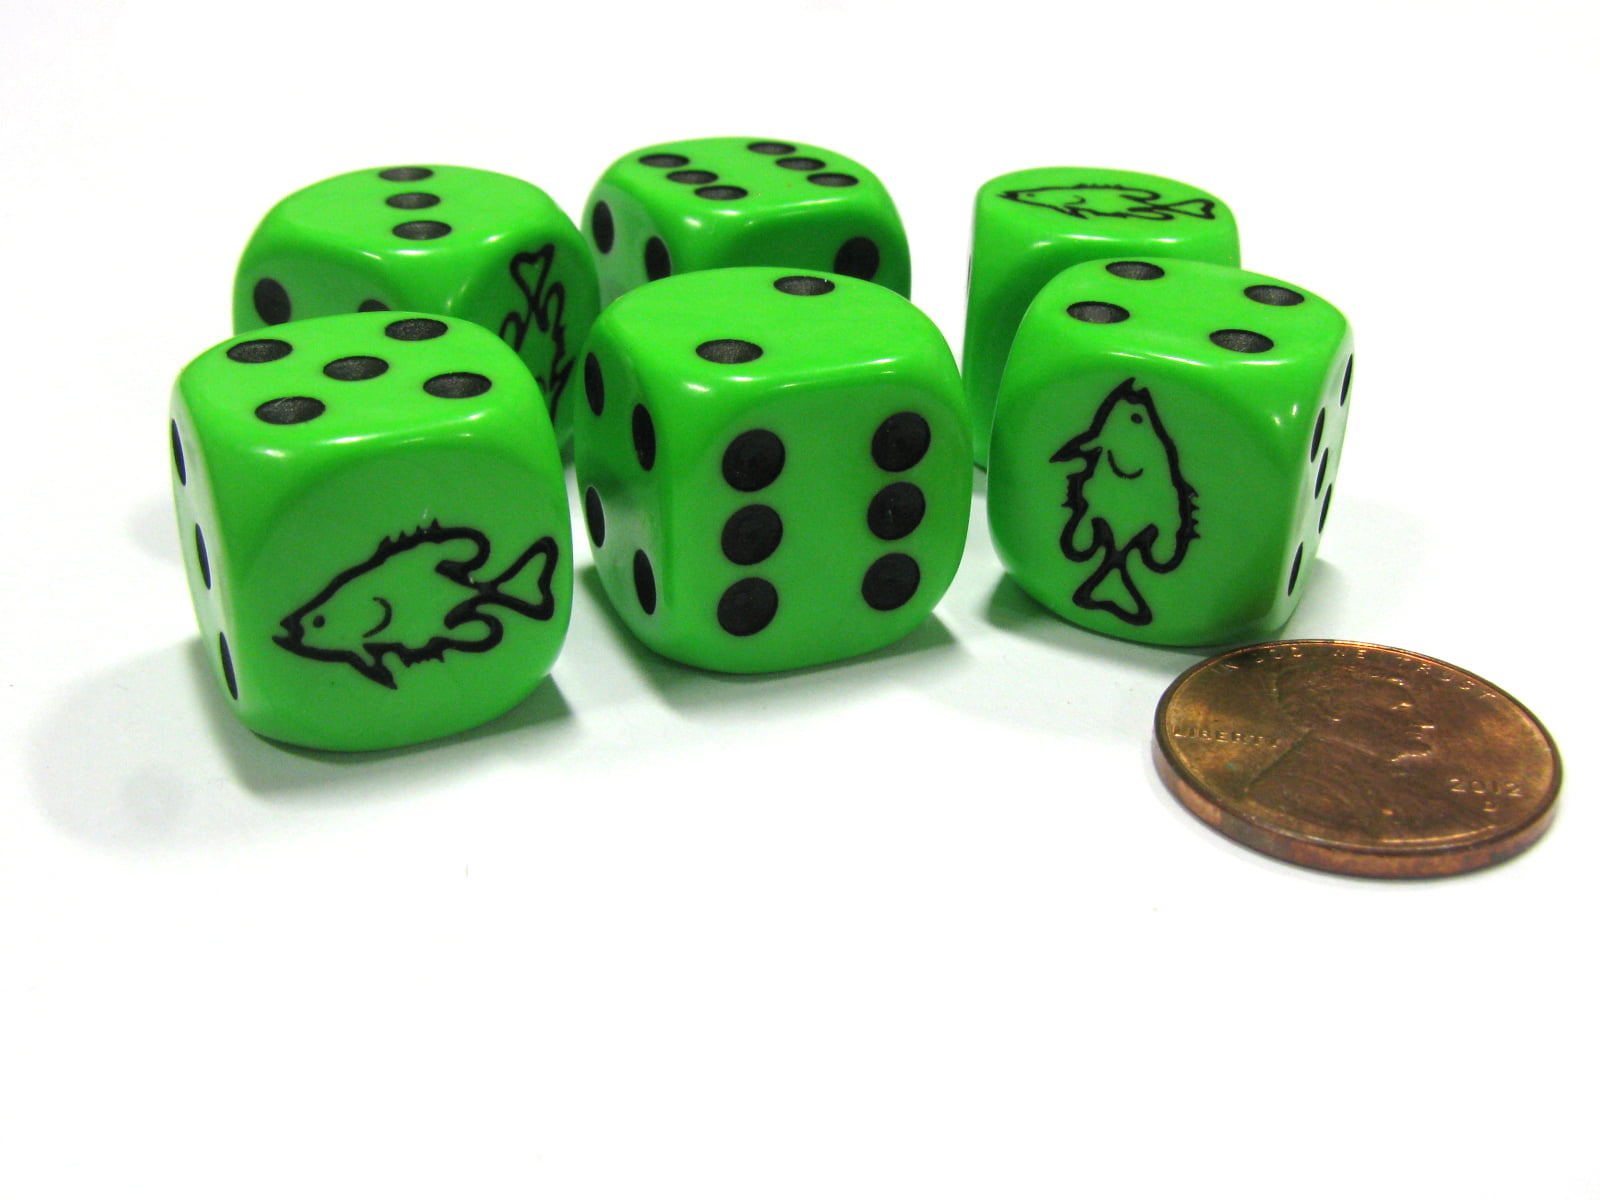 Bulk Pack of 50 Koplow Games 5/8in Green Fish Dice with Black Pips D6 16mm